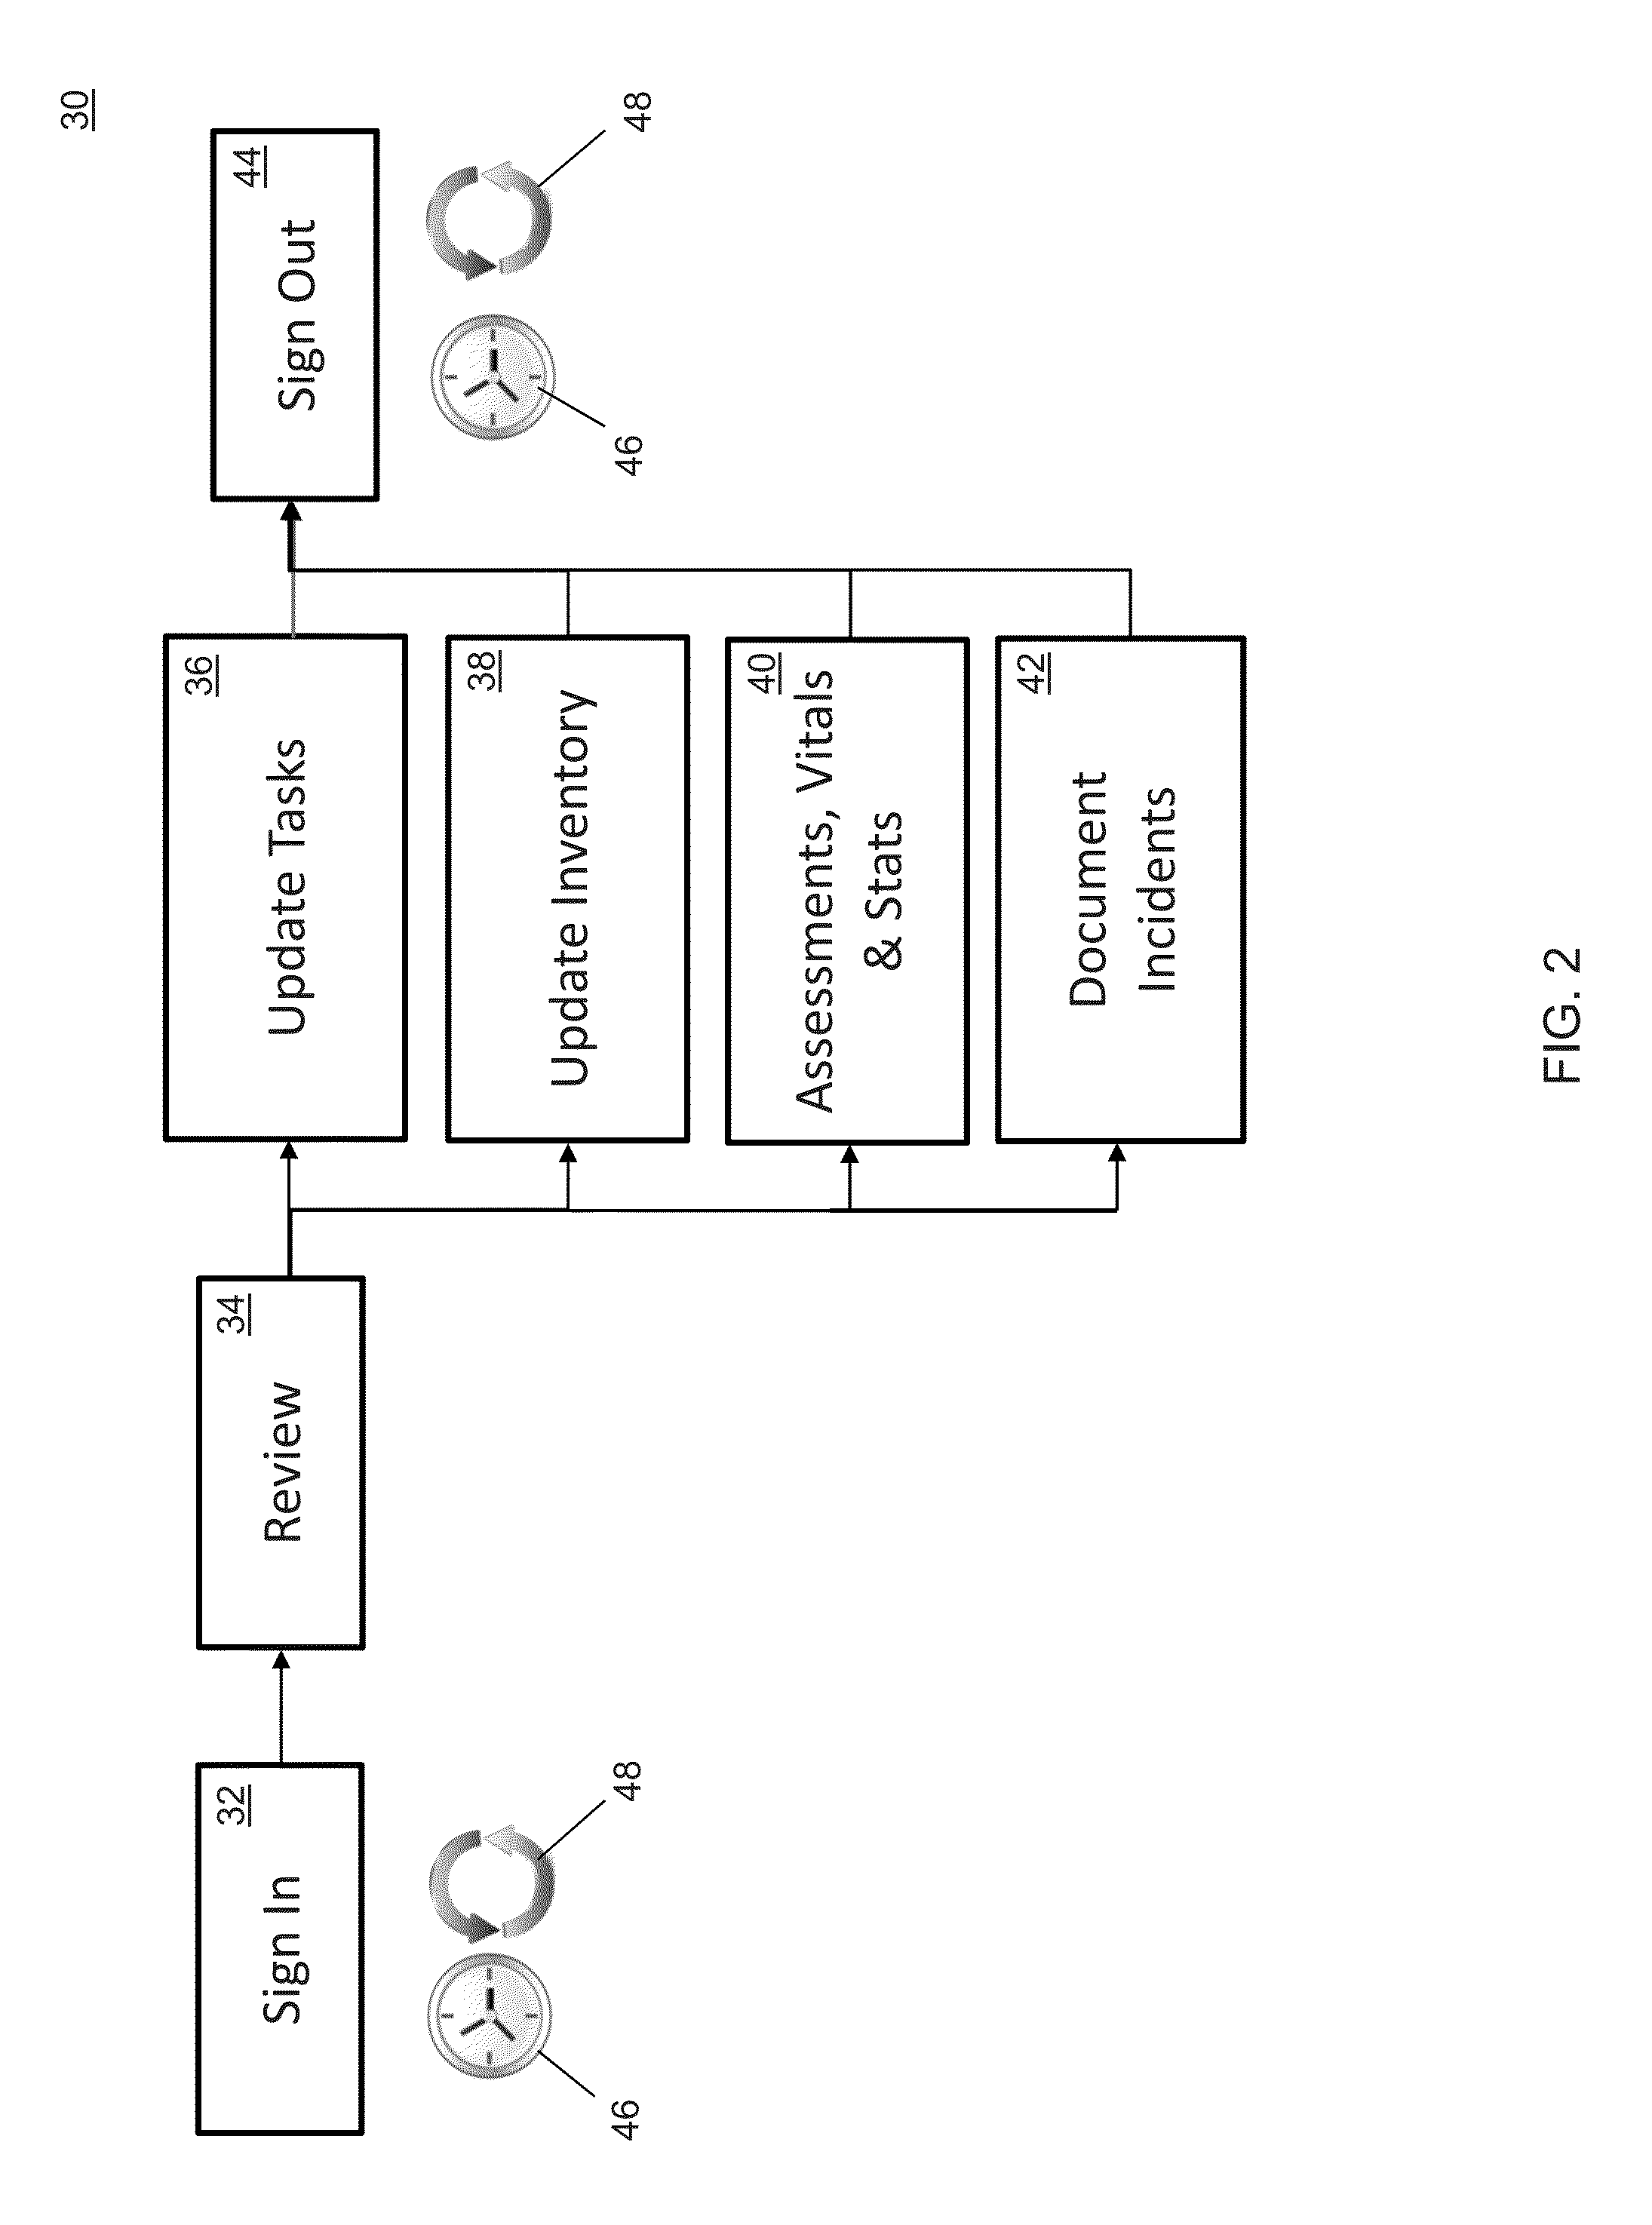 Home health care system and method